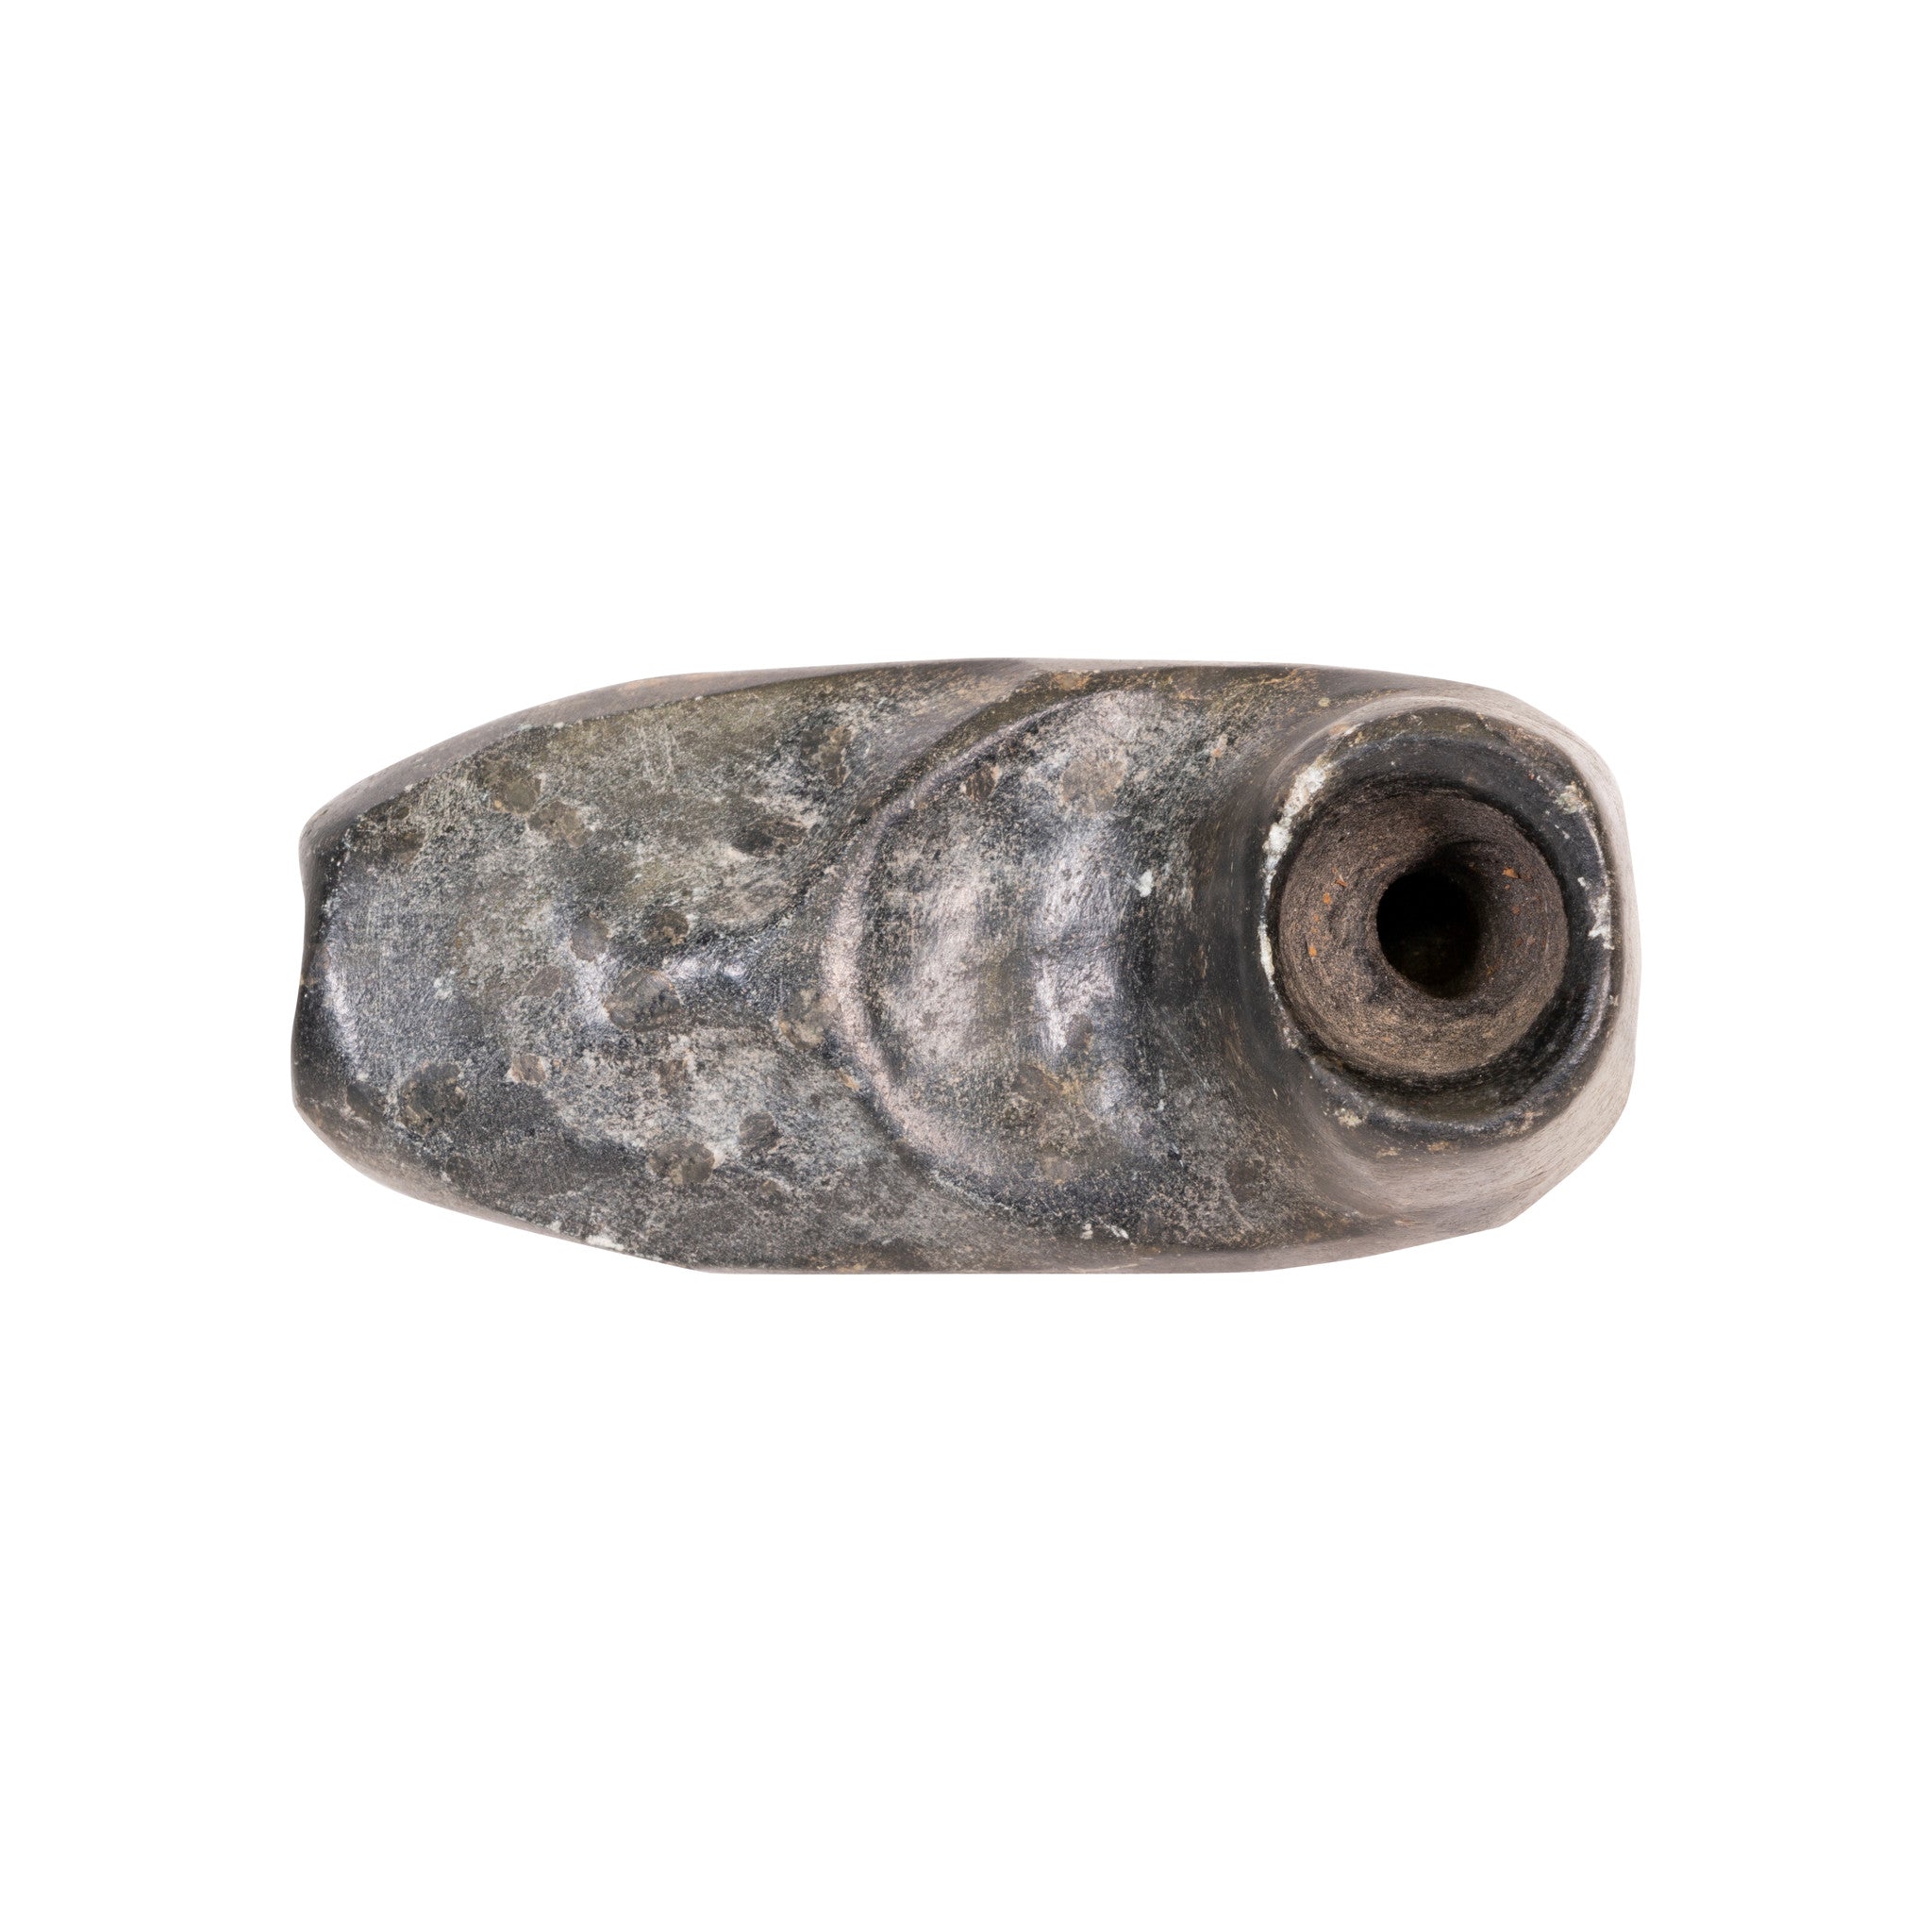 Early Plateau Pipe